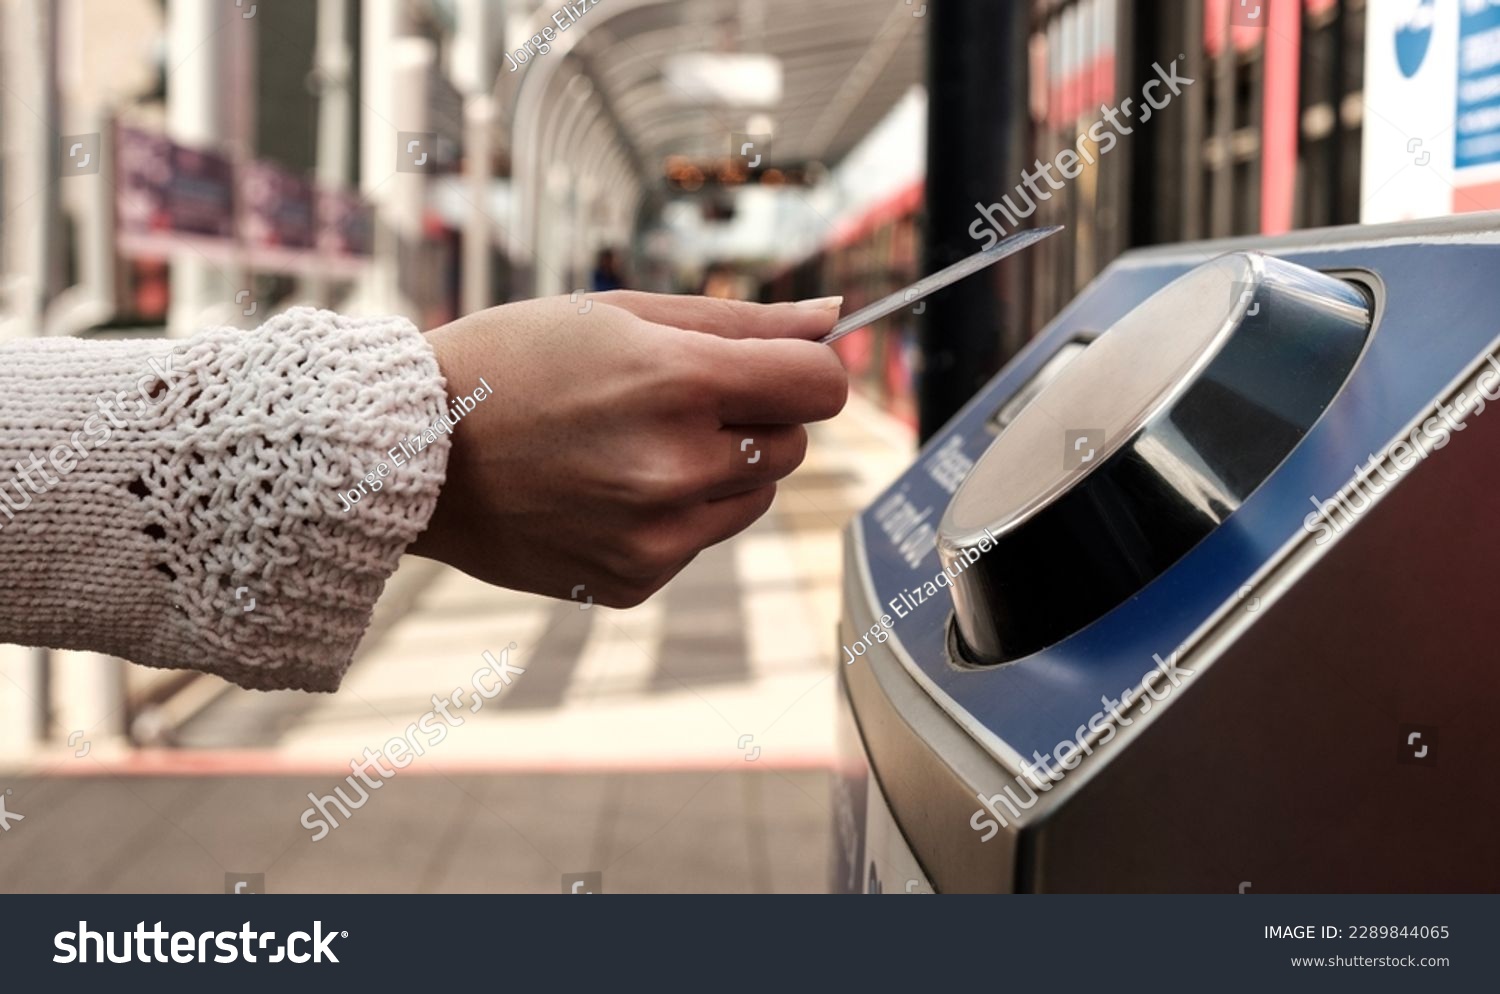 Female hand holding a card on contactless card reader machine in train station in London. There a blurry red train in the station. No cash public transport concept. #2289844065